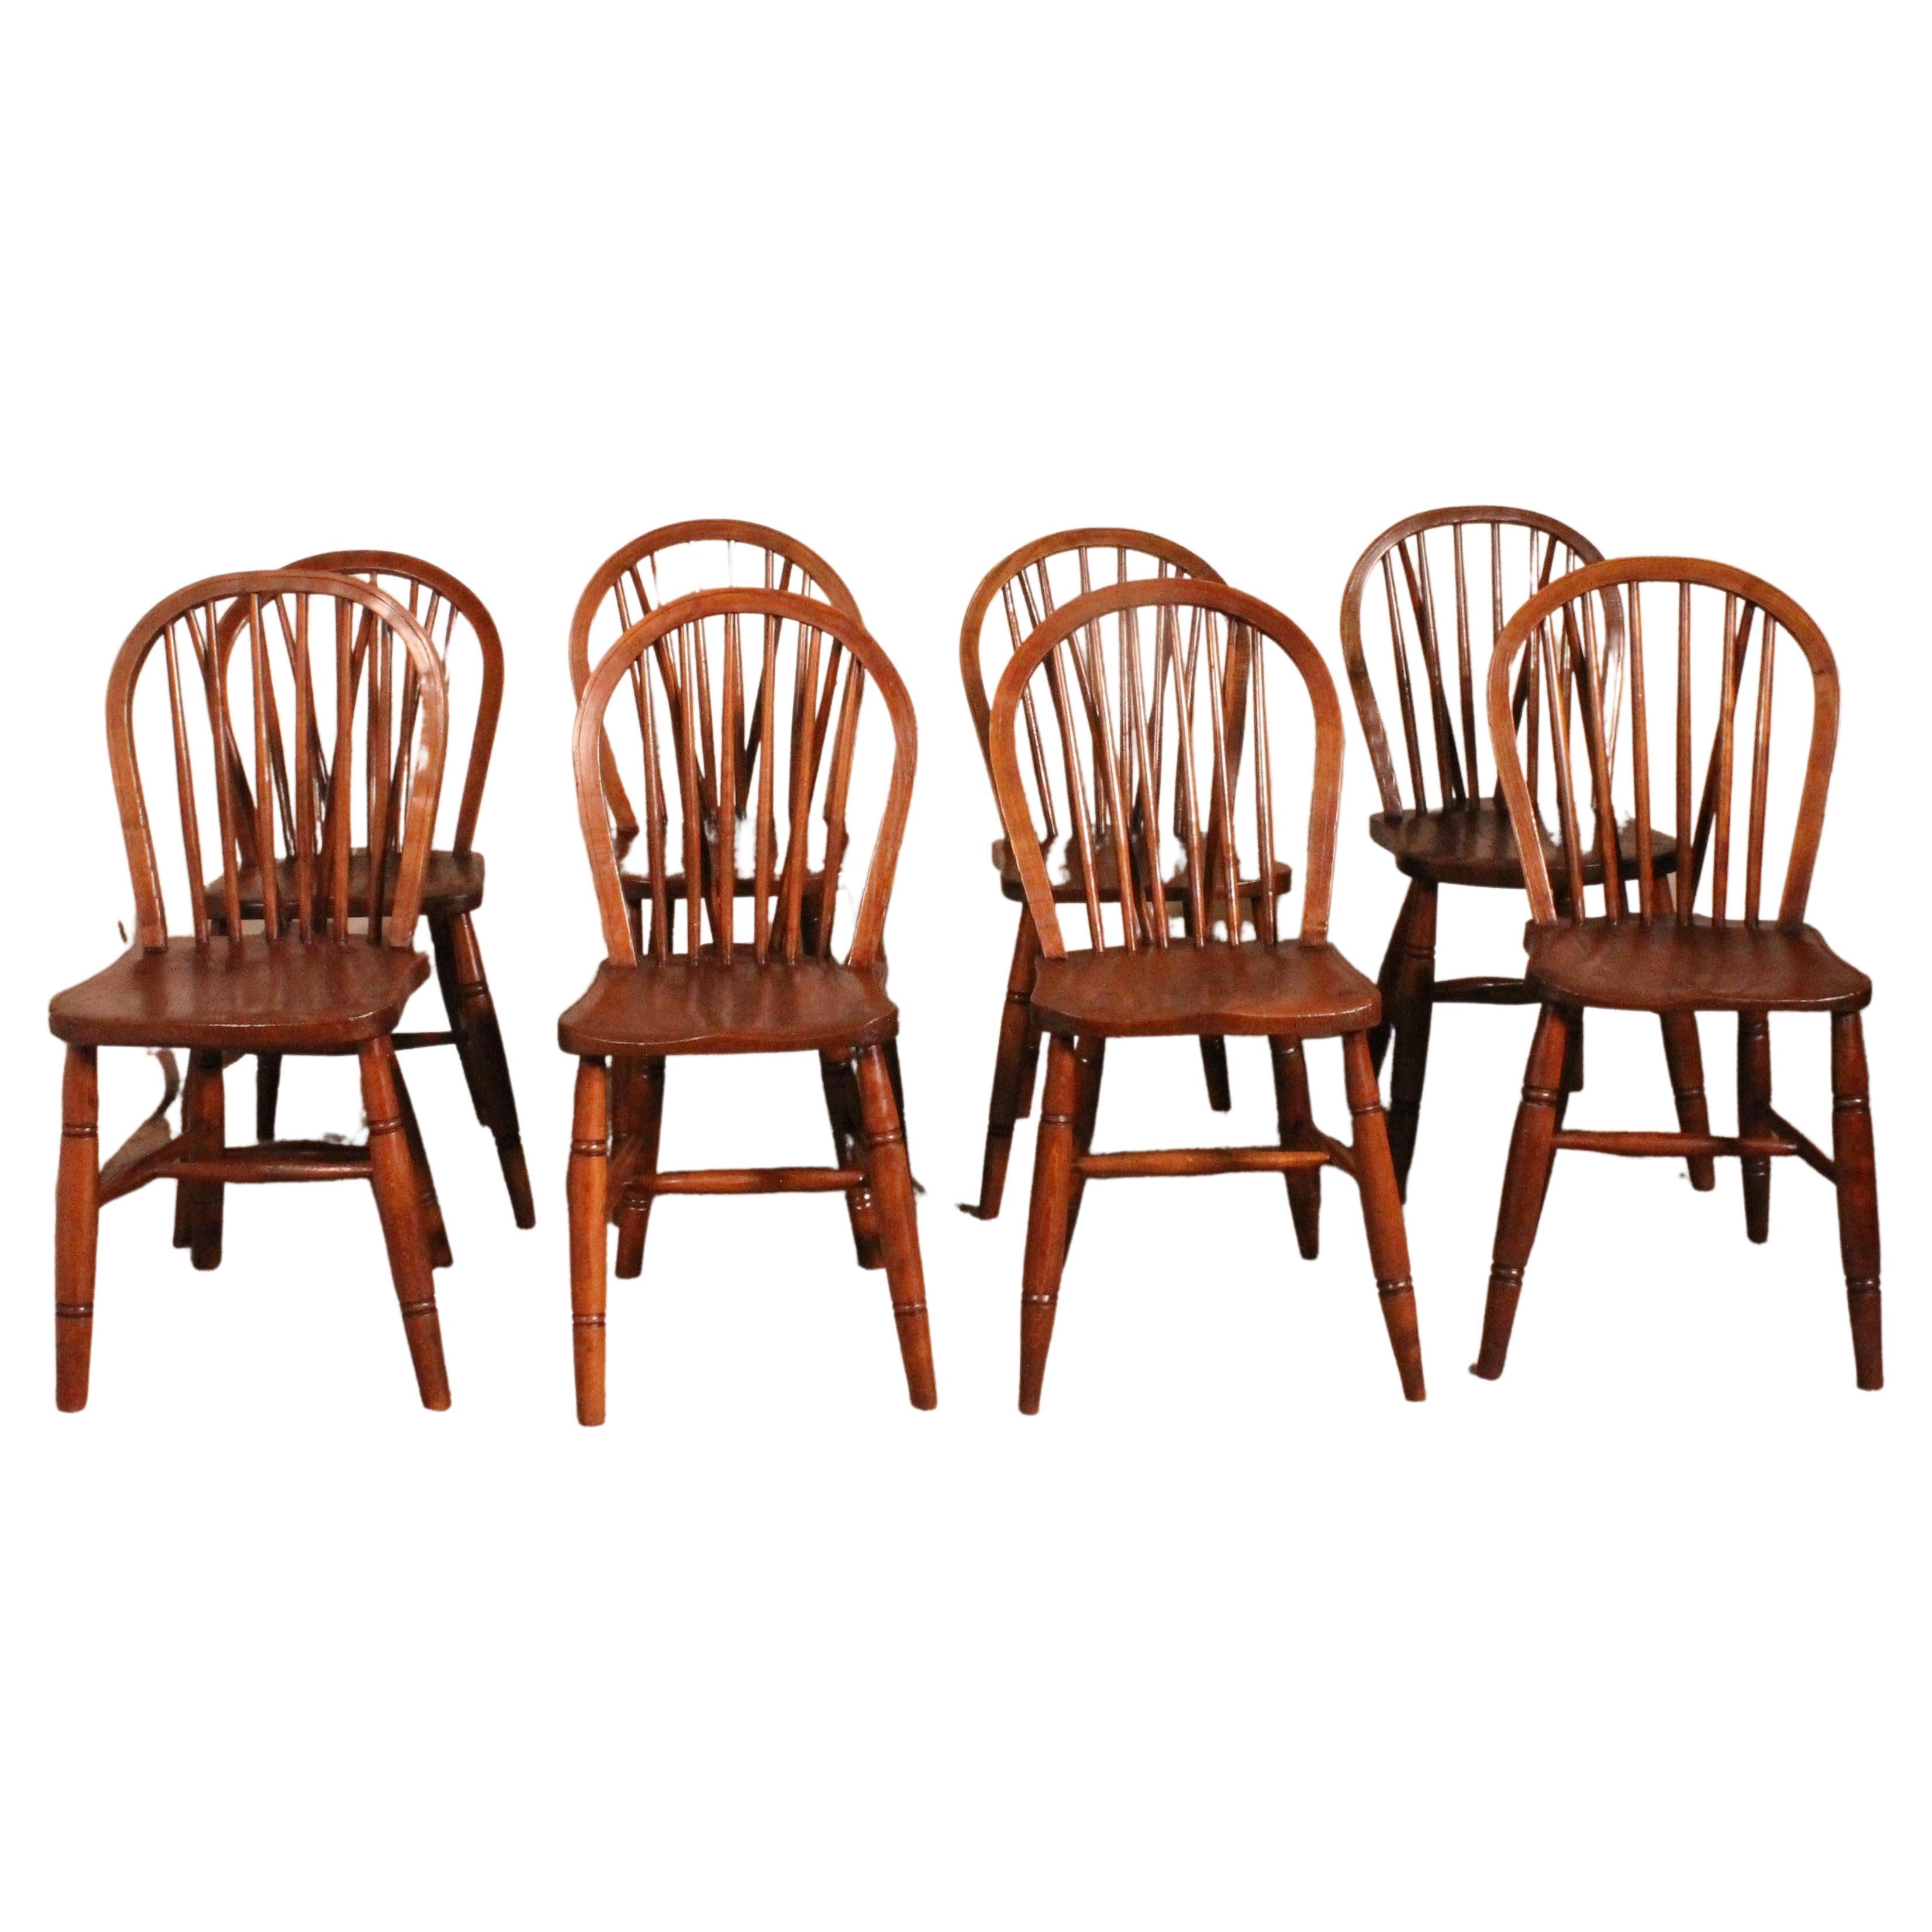 Set of 8 Windsor Chairs 19th Century-England